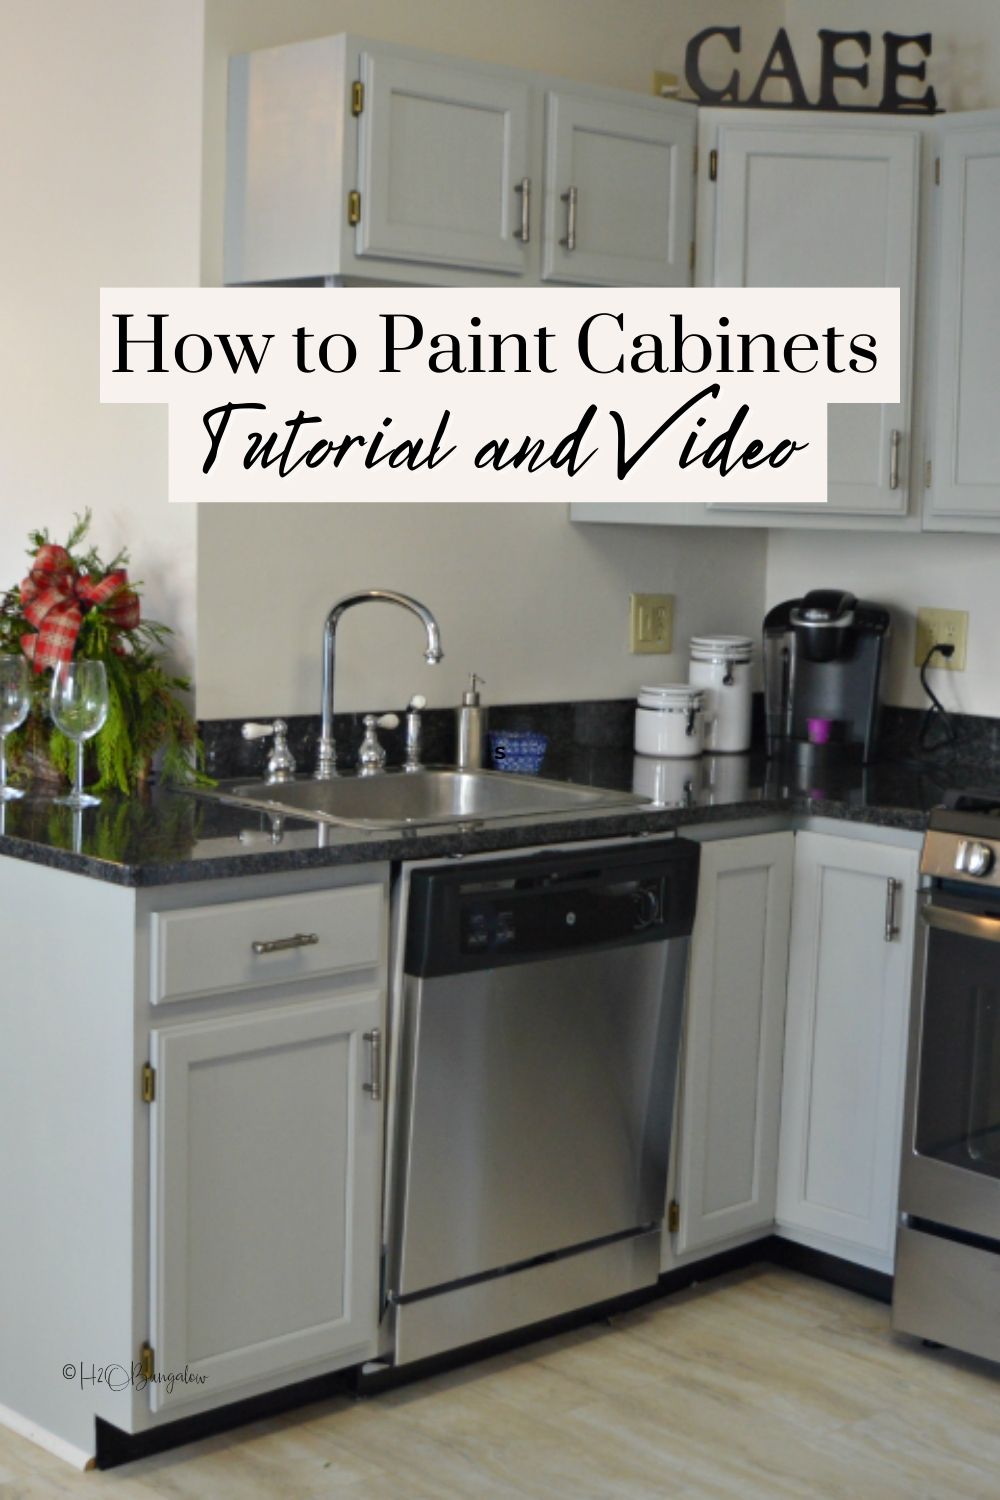 Painted cabinets in kitchen with text overlay "How to Paint Kitchen Cabinets, tutorial and video"